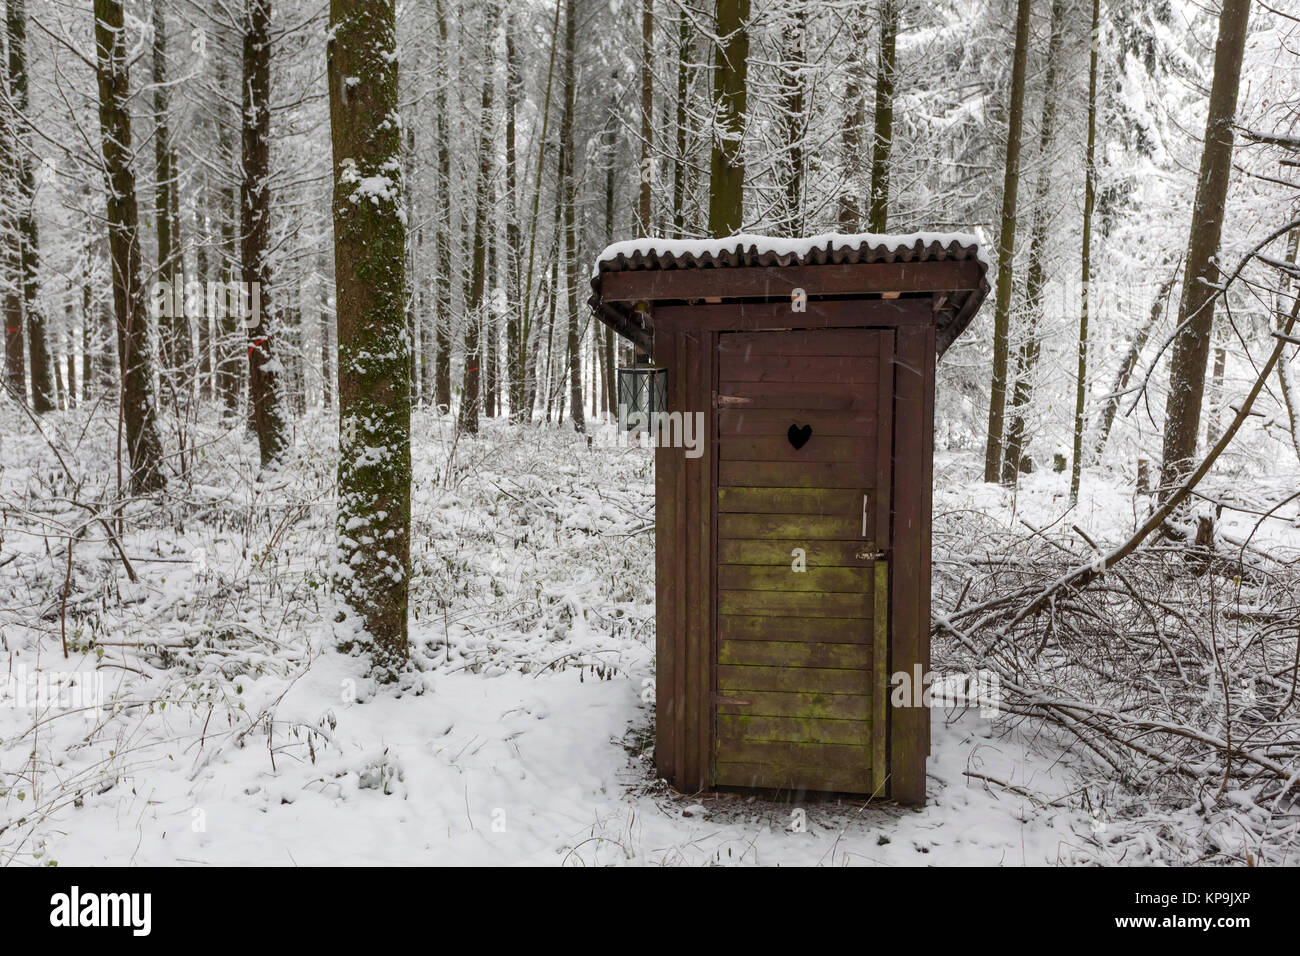 Wooden outdoor toilet in a snowy winter forest Stock Photo